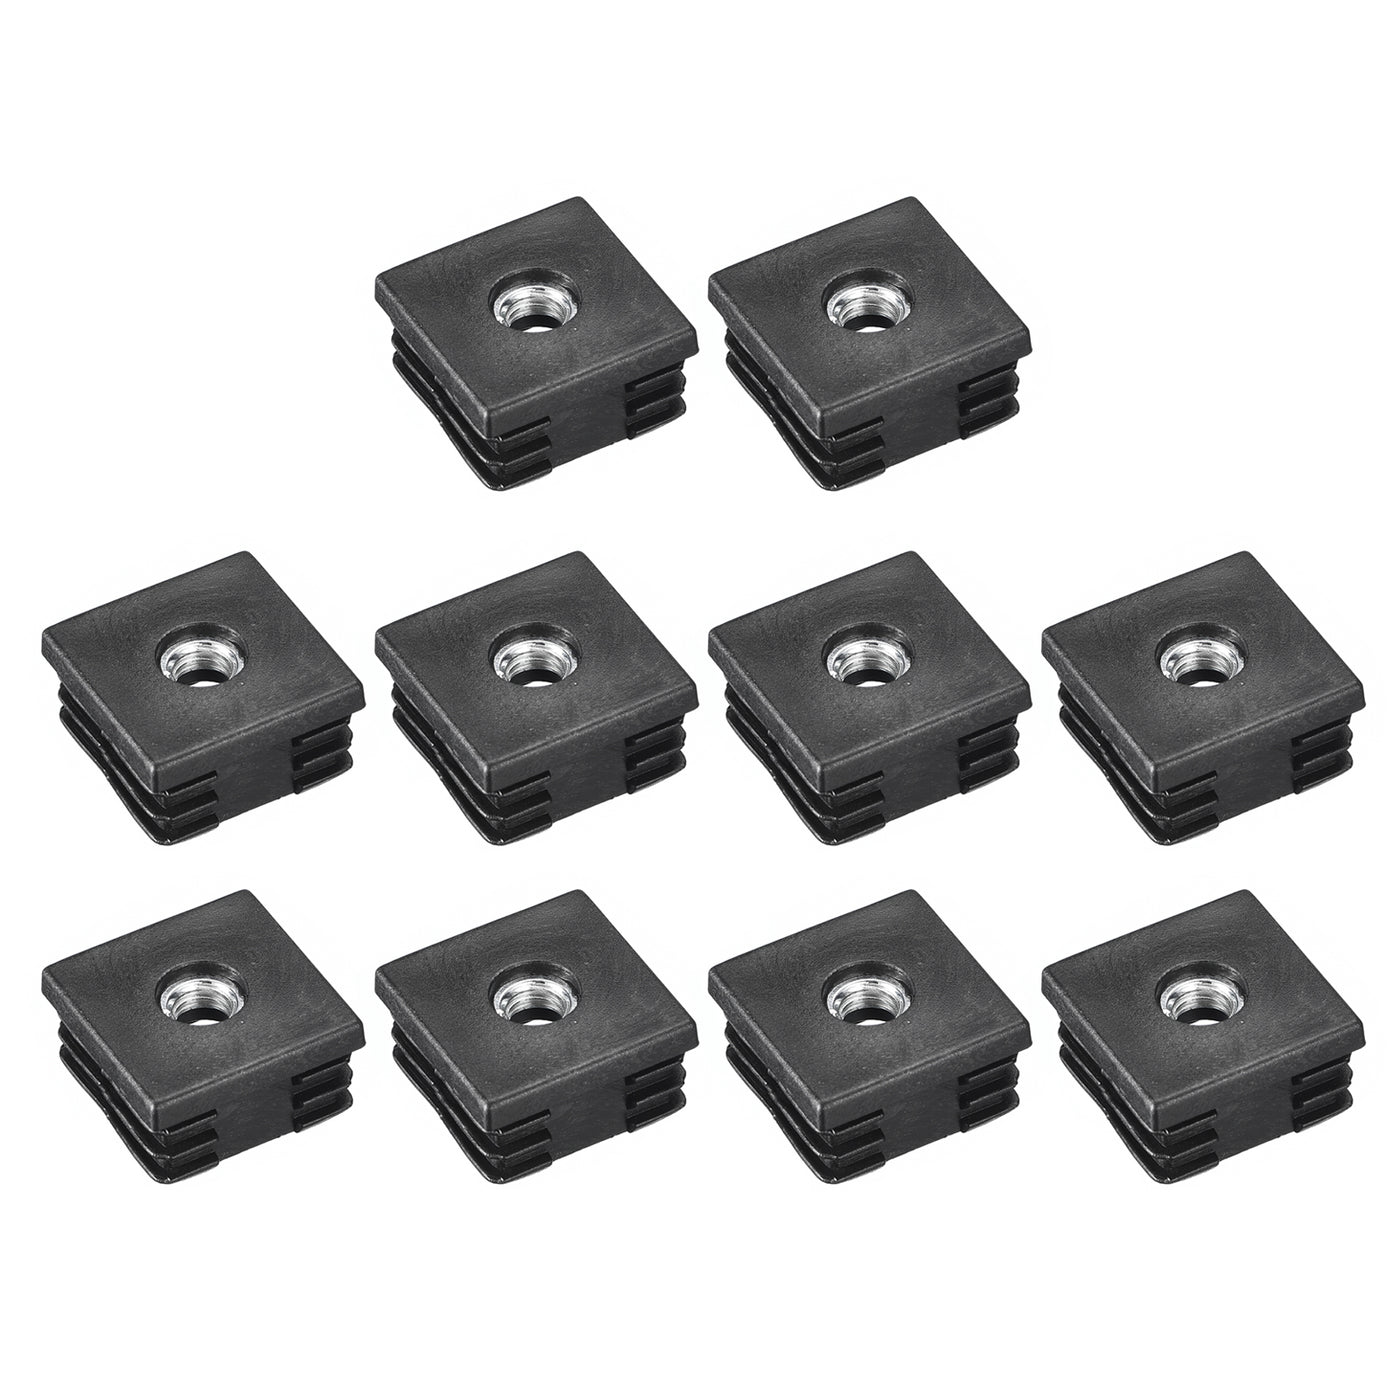 uxcell Uxcell 10Pcs 1.18"x1.18" Caster Insert with Thread, Square M8 Thread for Furniture